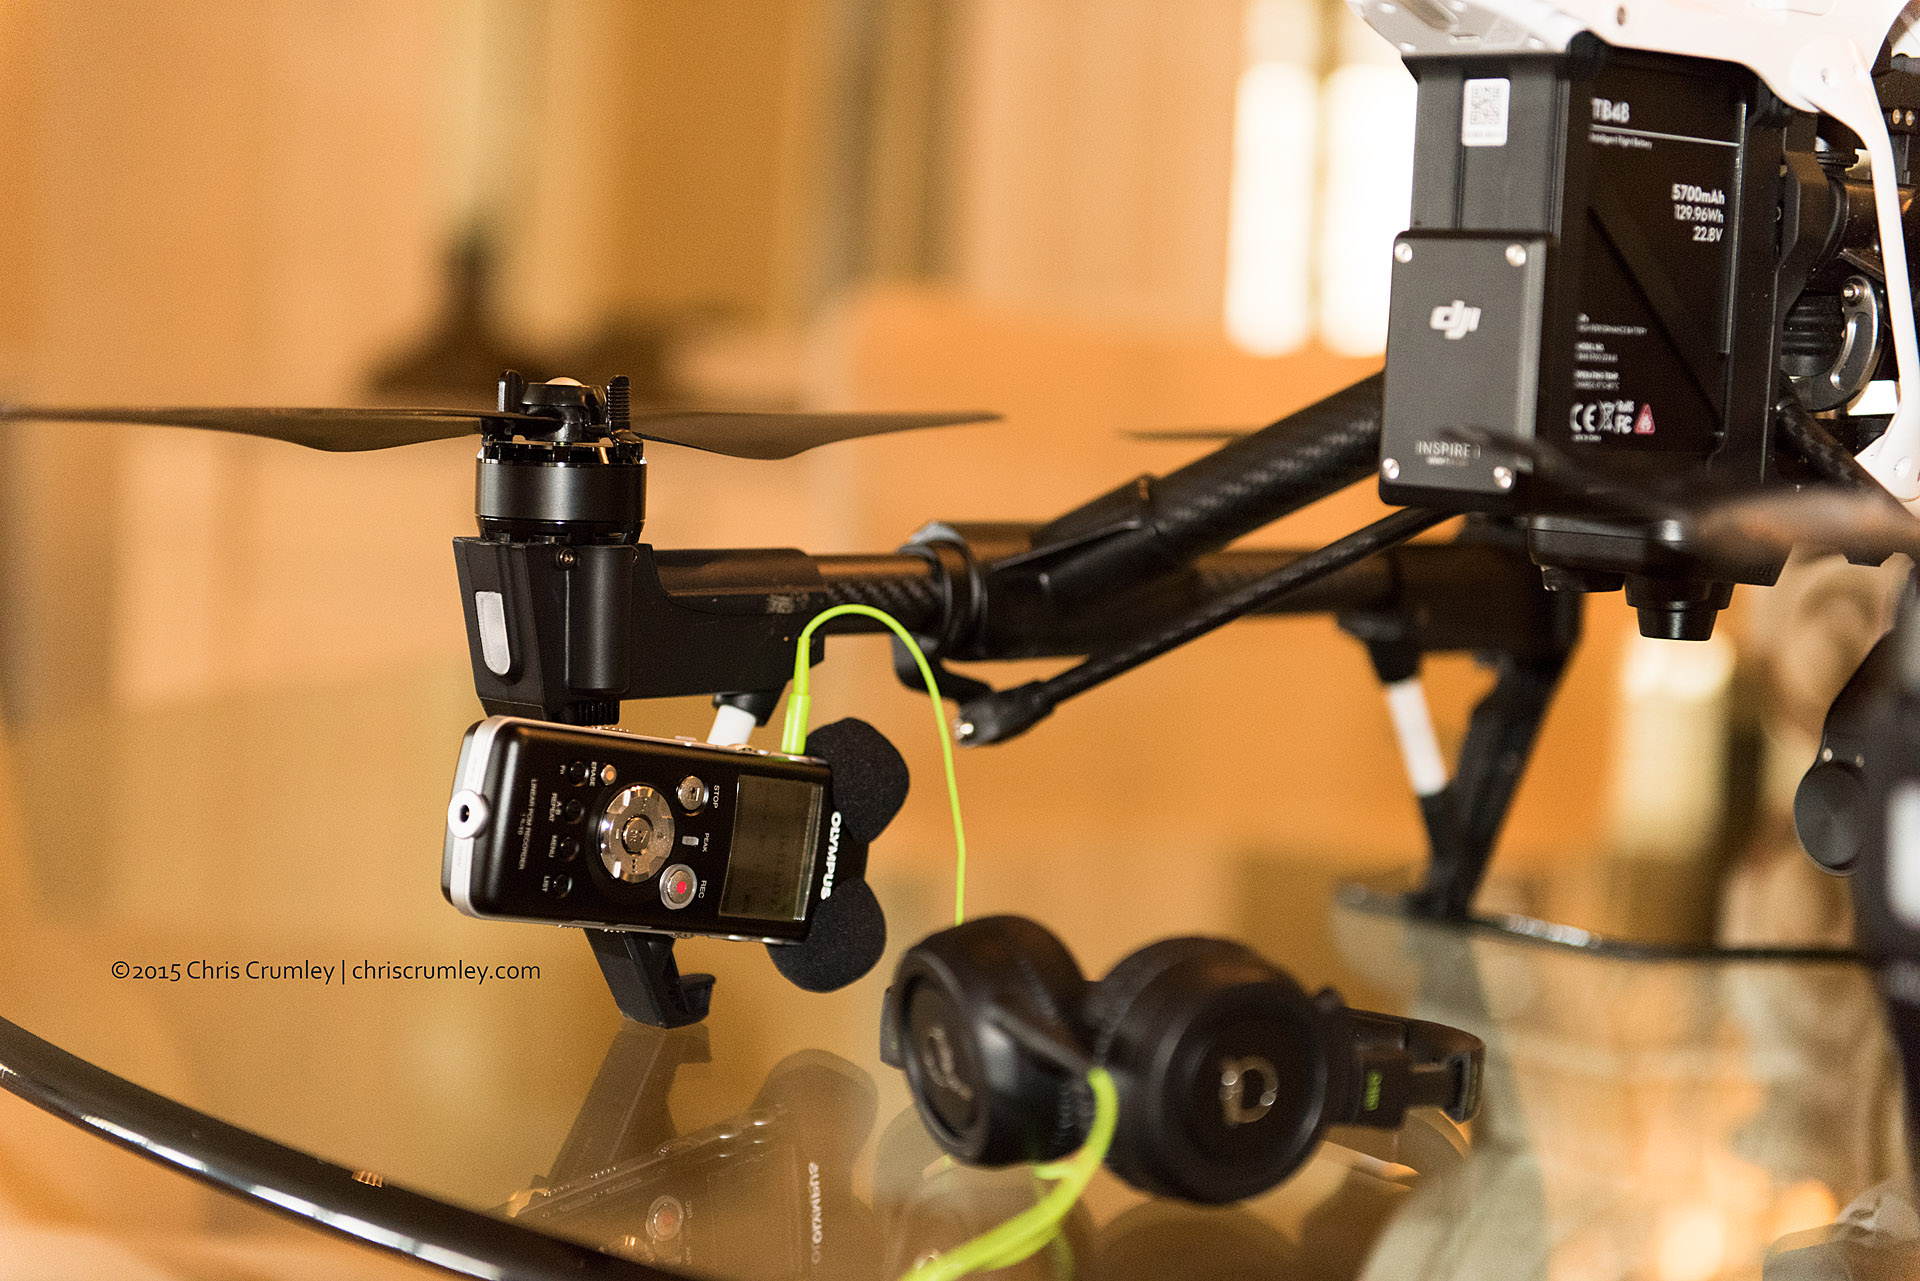 DJI Inspire 1 Rigged for Audio